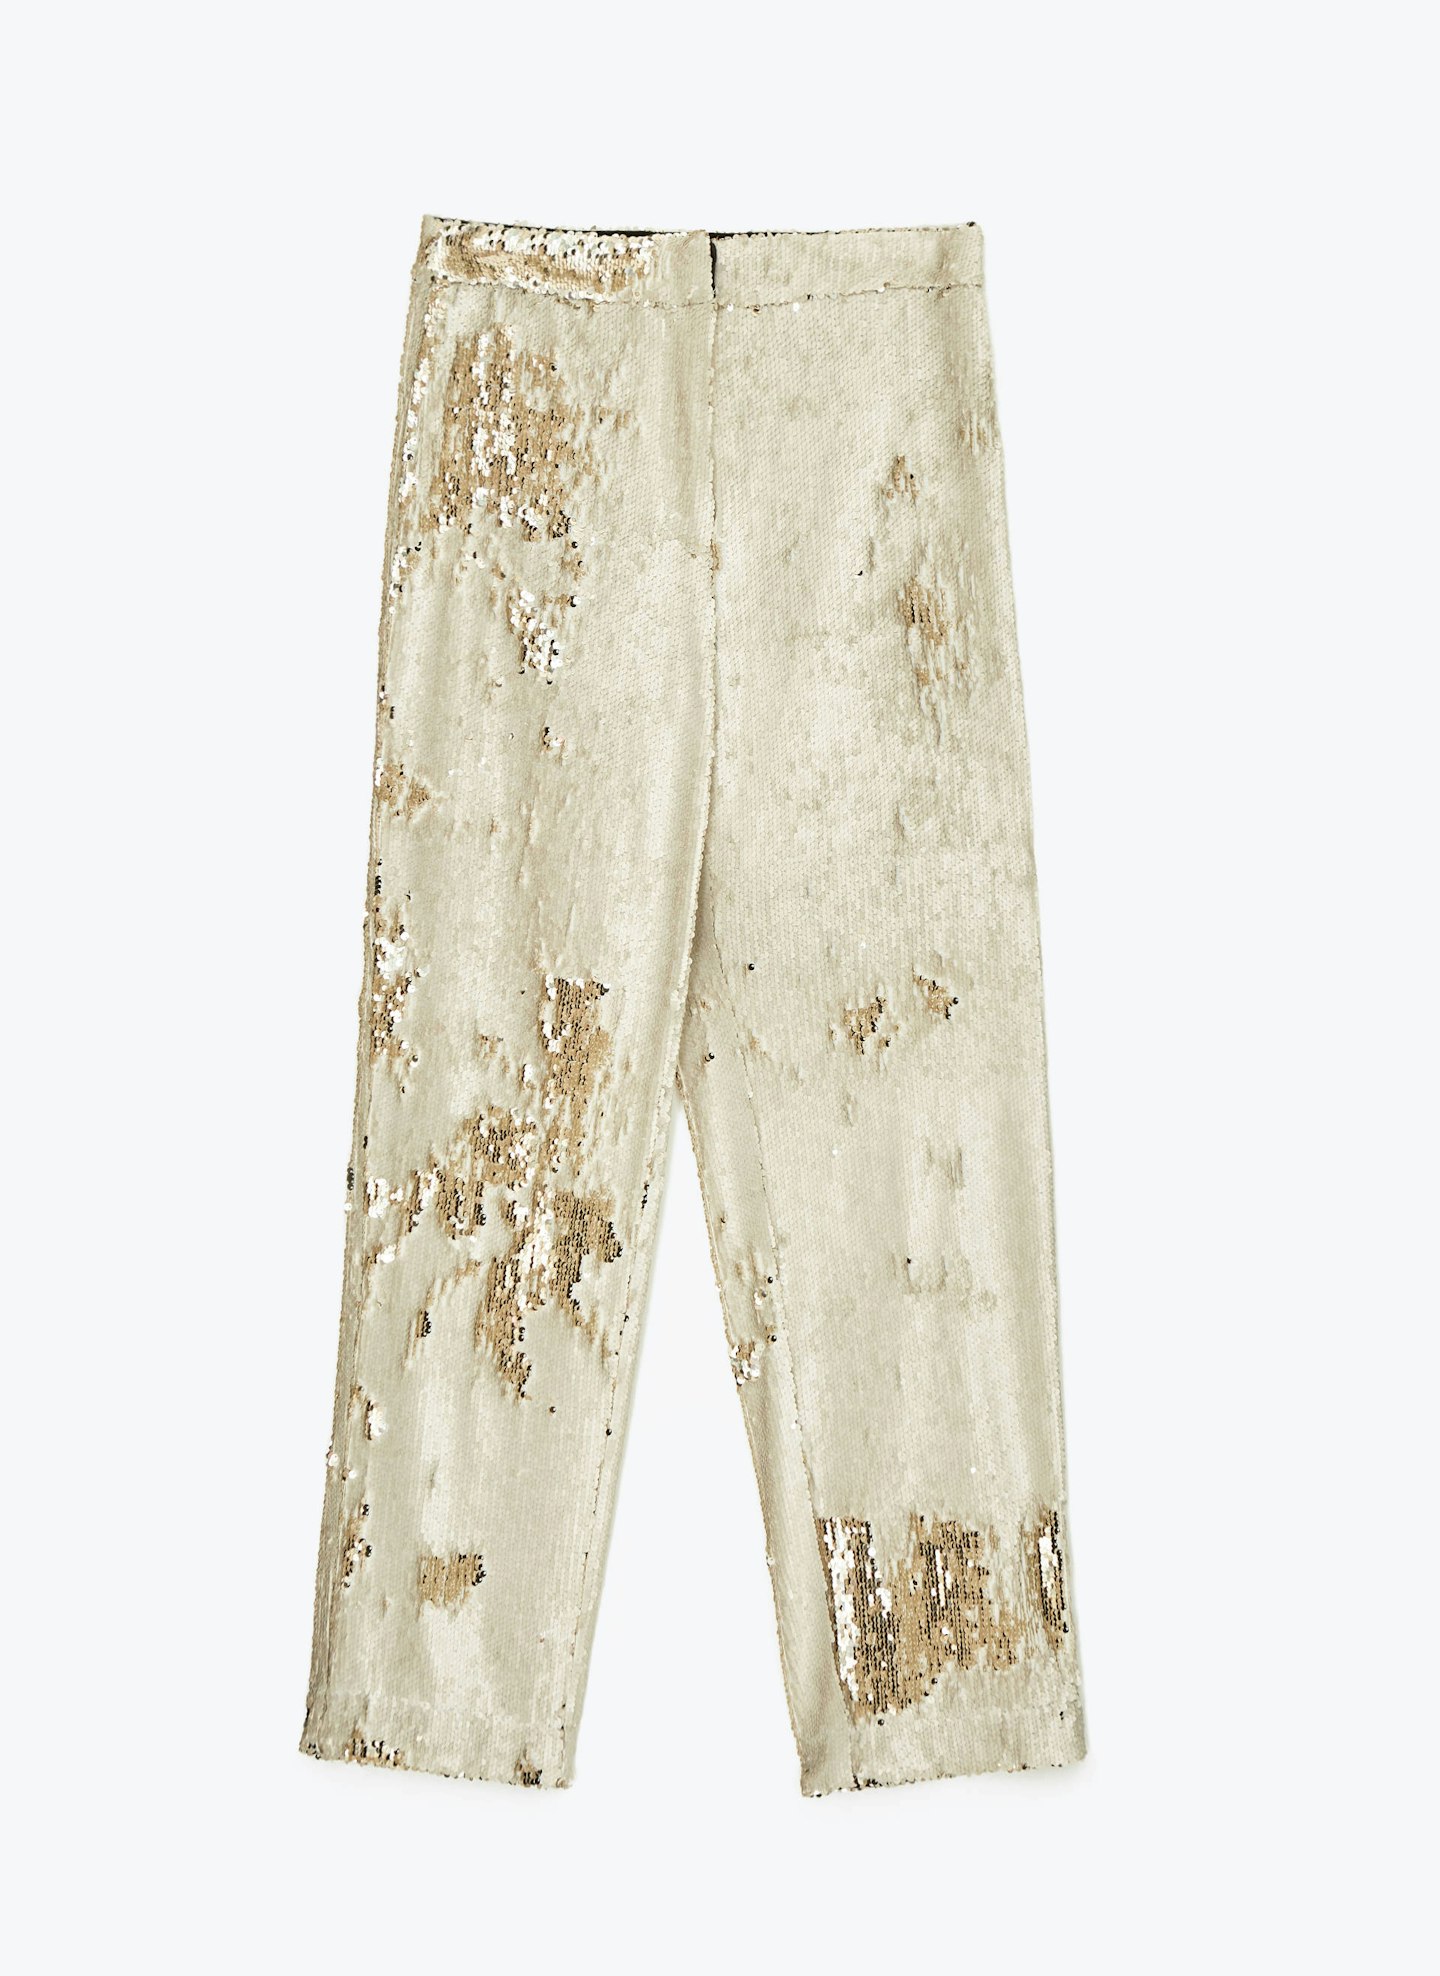 Uterque, Sequinned Trousers, £120